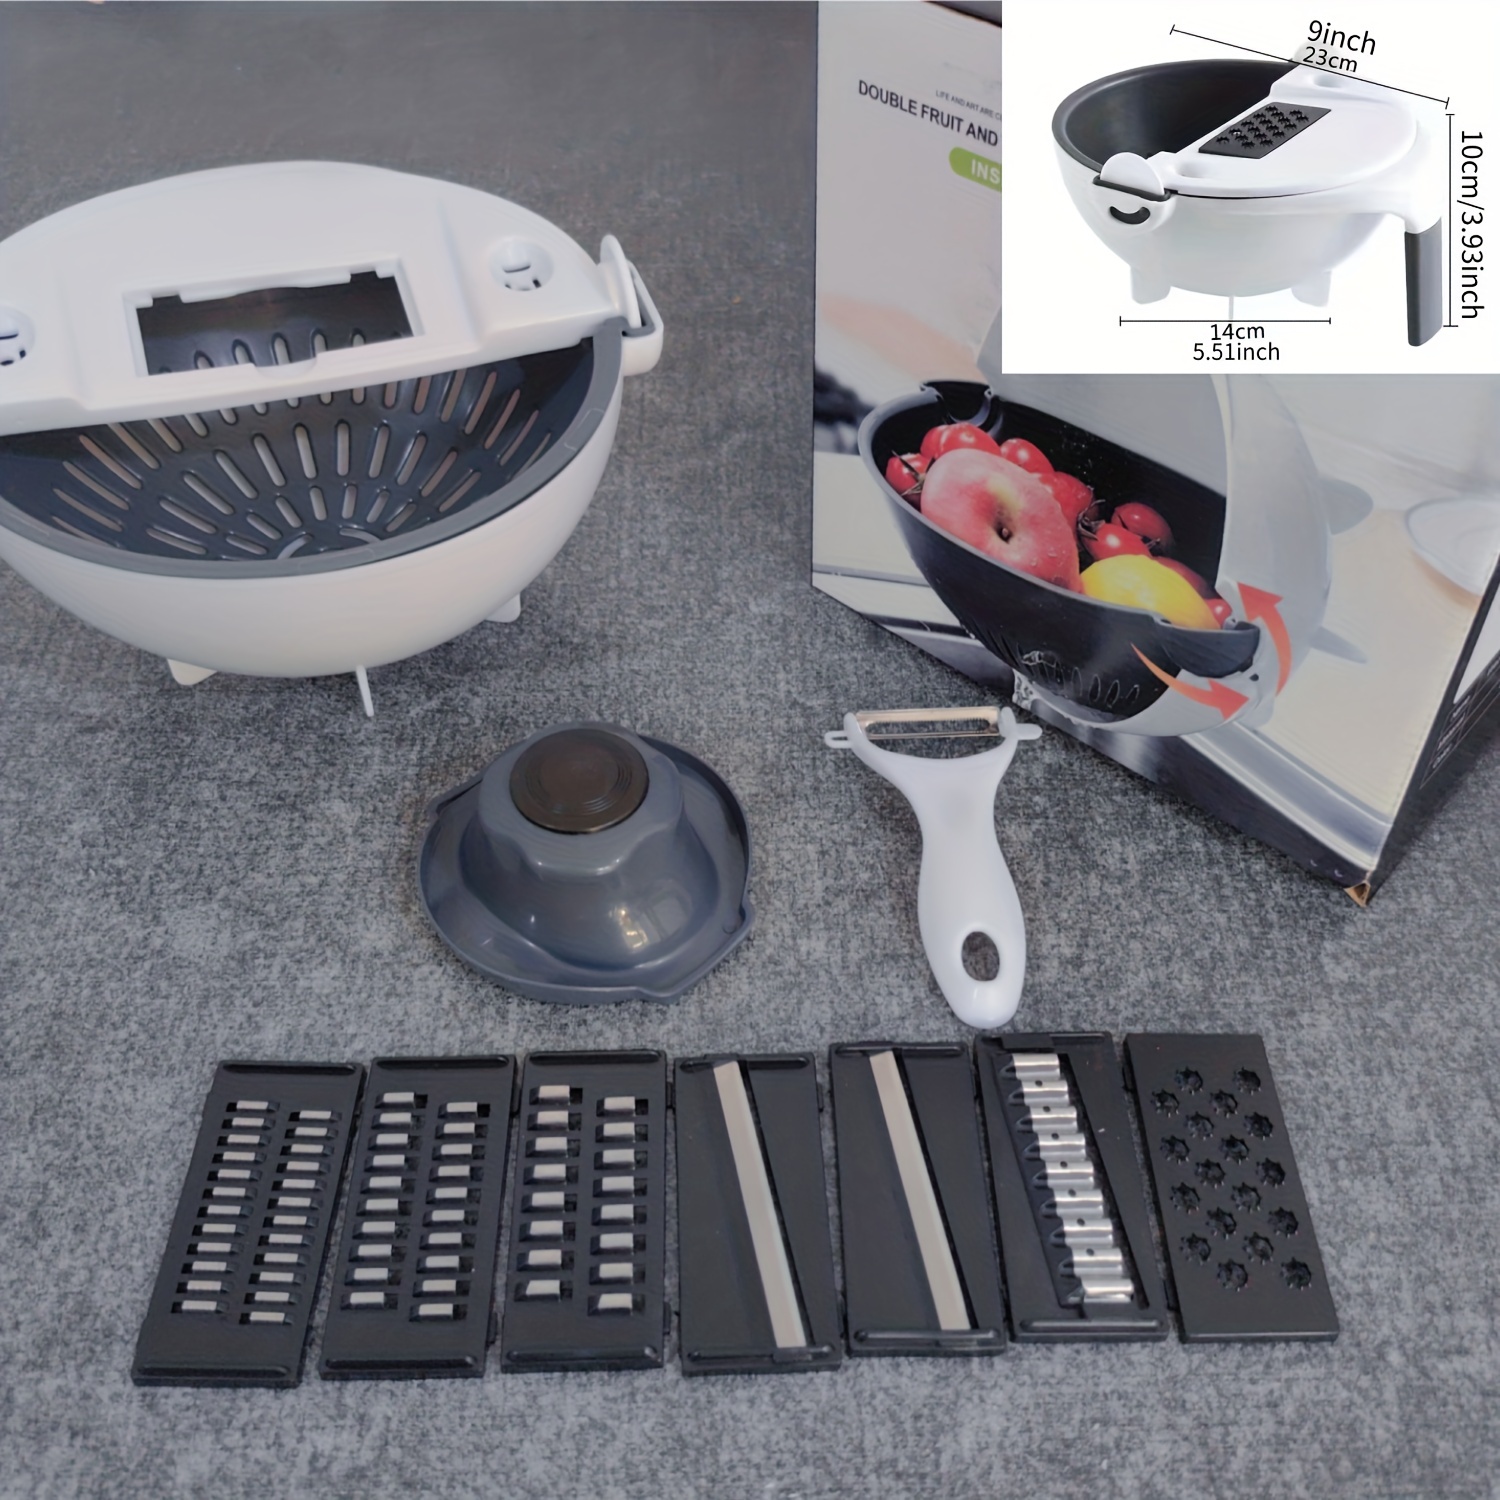 Manual Plastic 9 in 1 Multi-Function Vegetable Cutter with Drain Basket